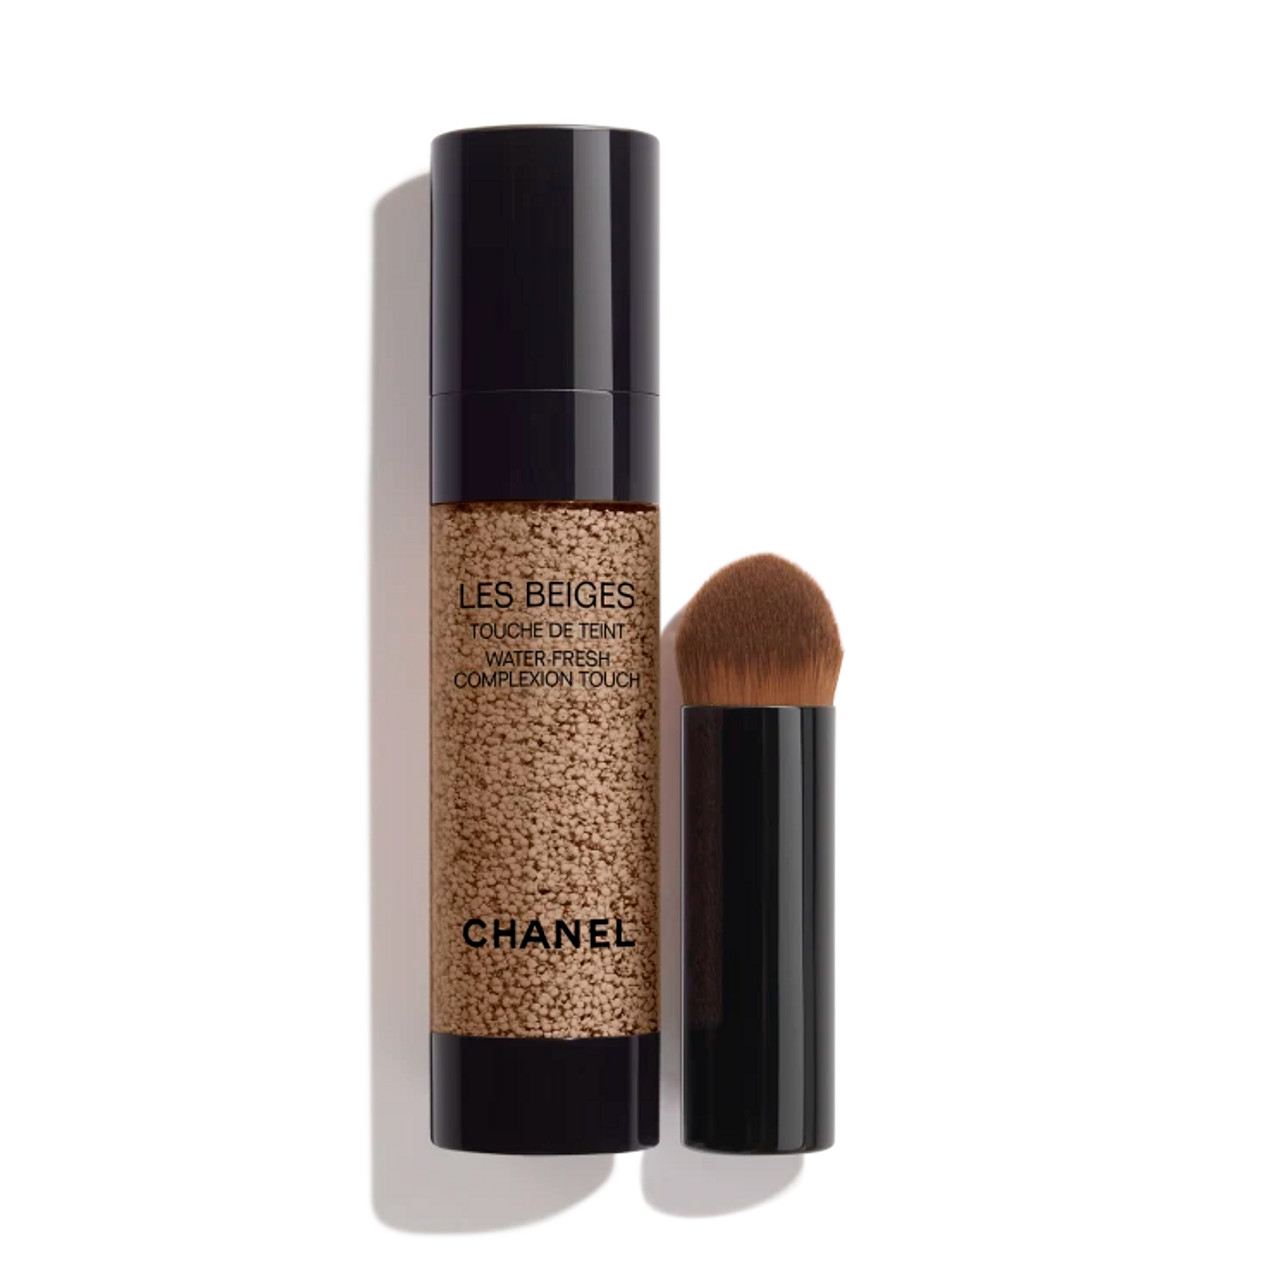 chanel water fresh complexion touch b30